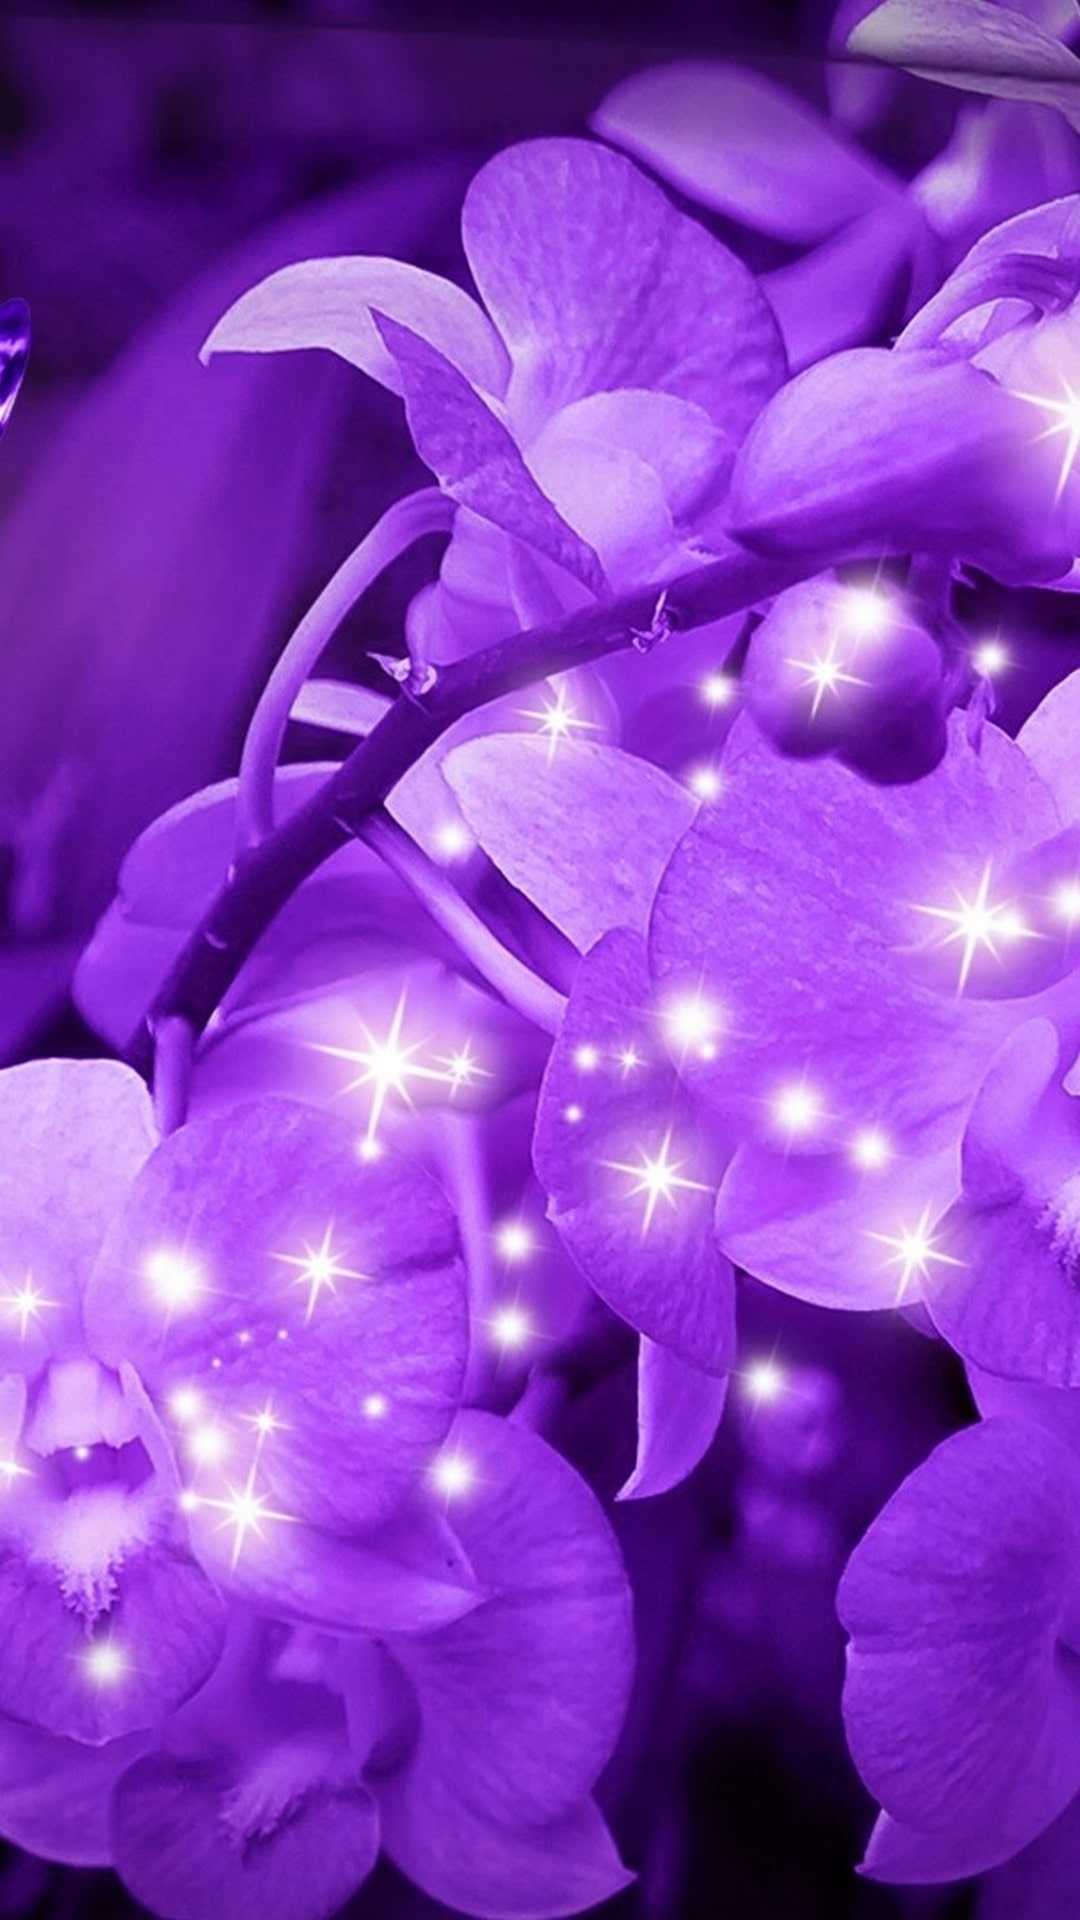 Purple Flowers in CloseUp Photography  Free Stock Photo